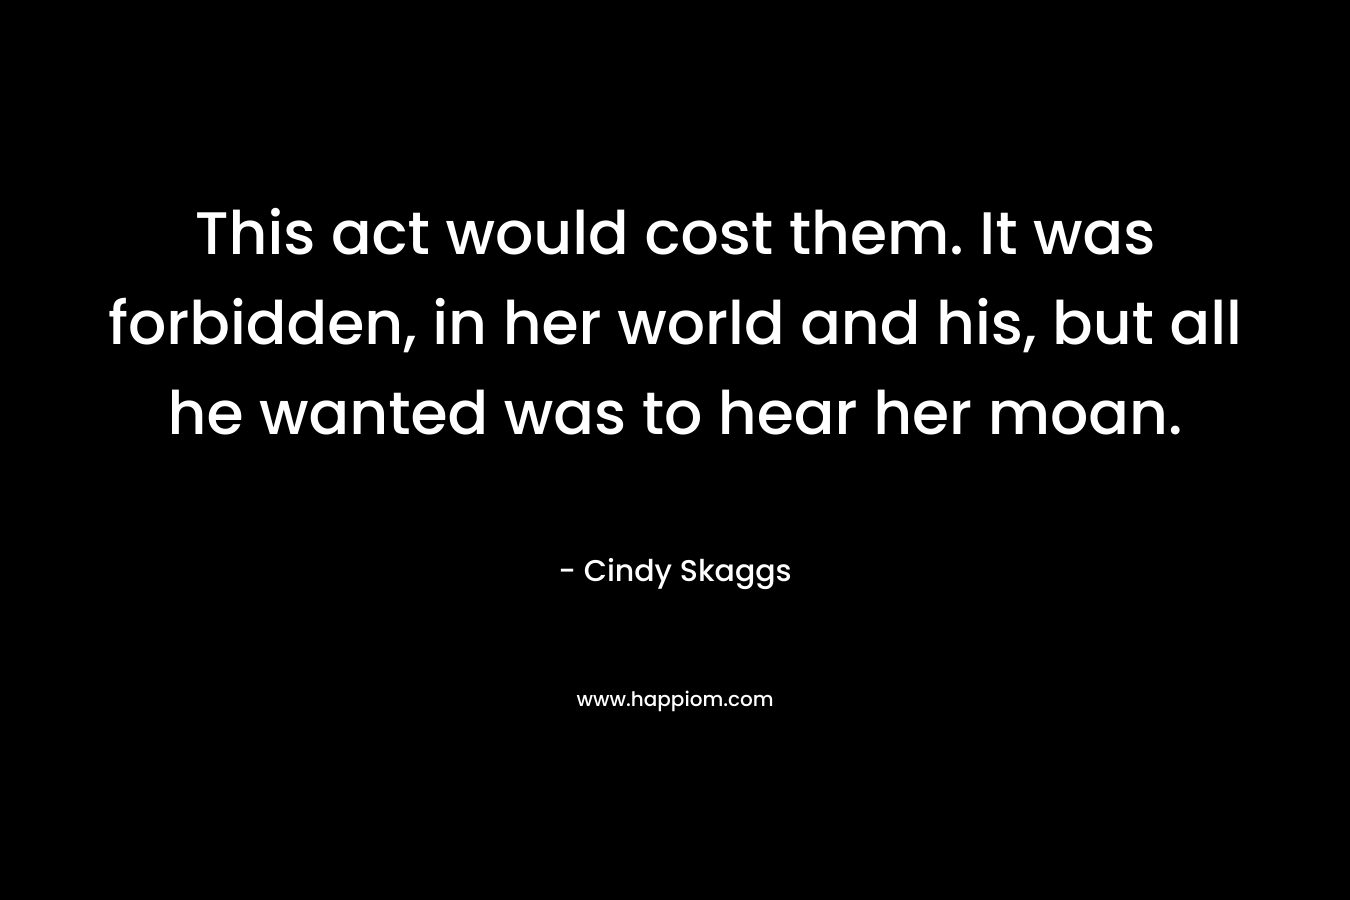 This act would cost them. It was forbidden, in her world and his, but all he wanted was to hear her moan. – Cindy Skaggs